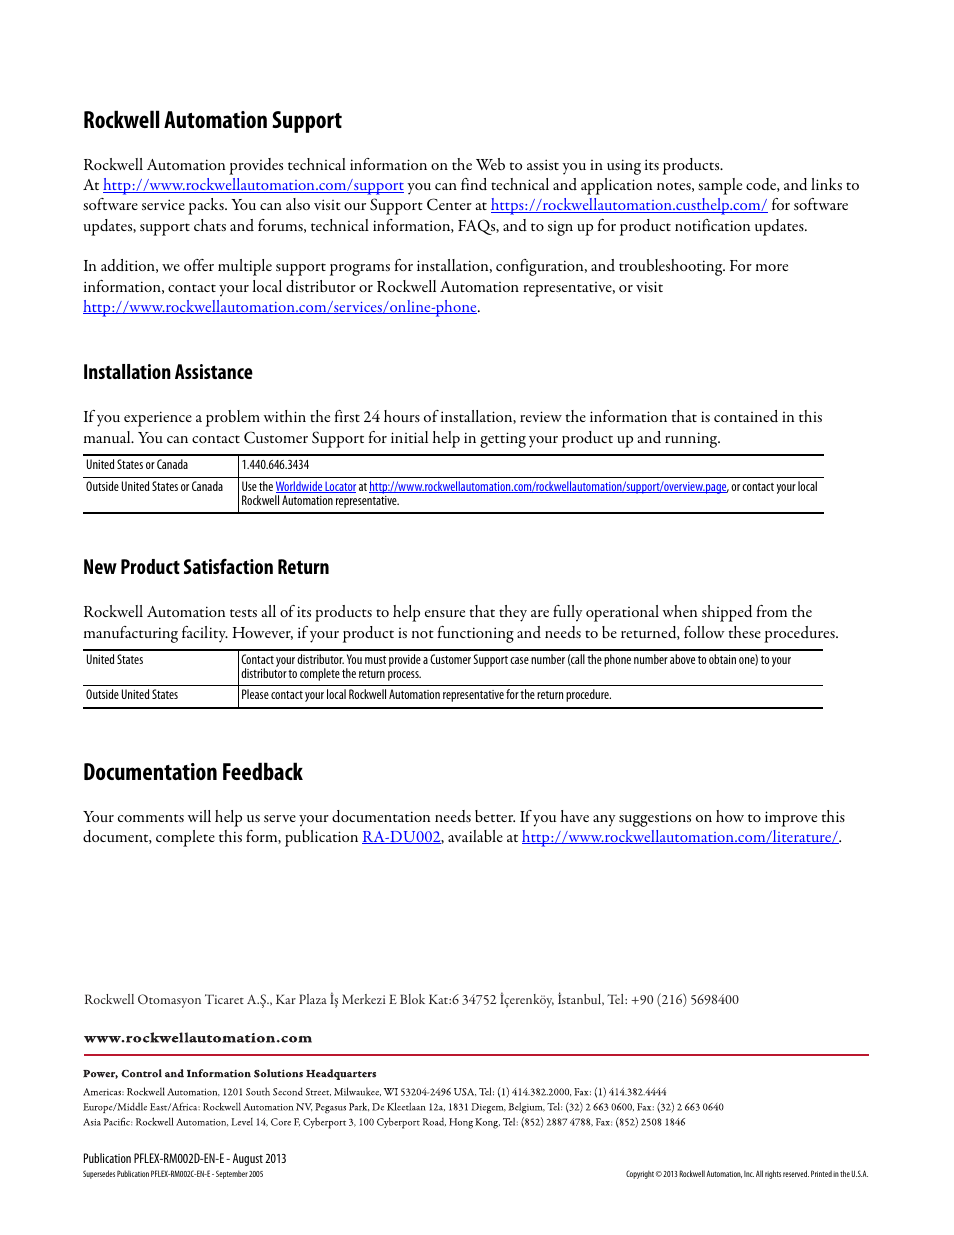 Back cover, Rockwell automation support, Documentation feedback | Installation assistance, New product satisfaction return | Rockwell Automation 20D PowerFlex 700S with Phase I Control Reference Manual User Manual | Page 190 / 190